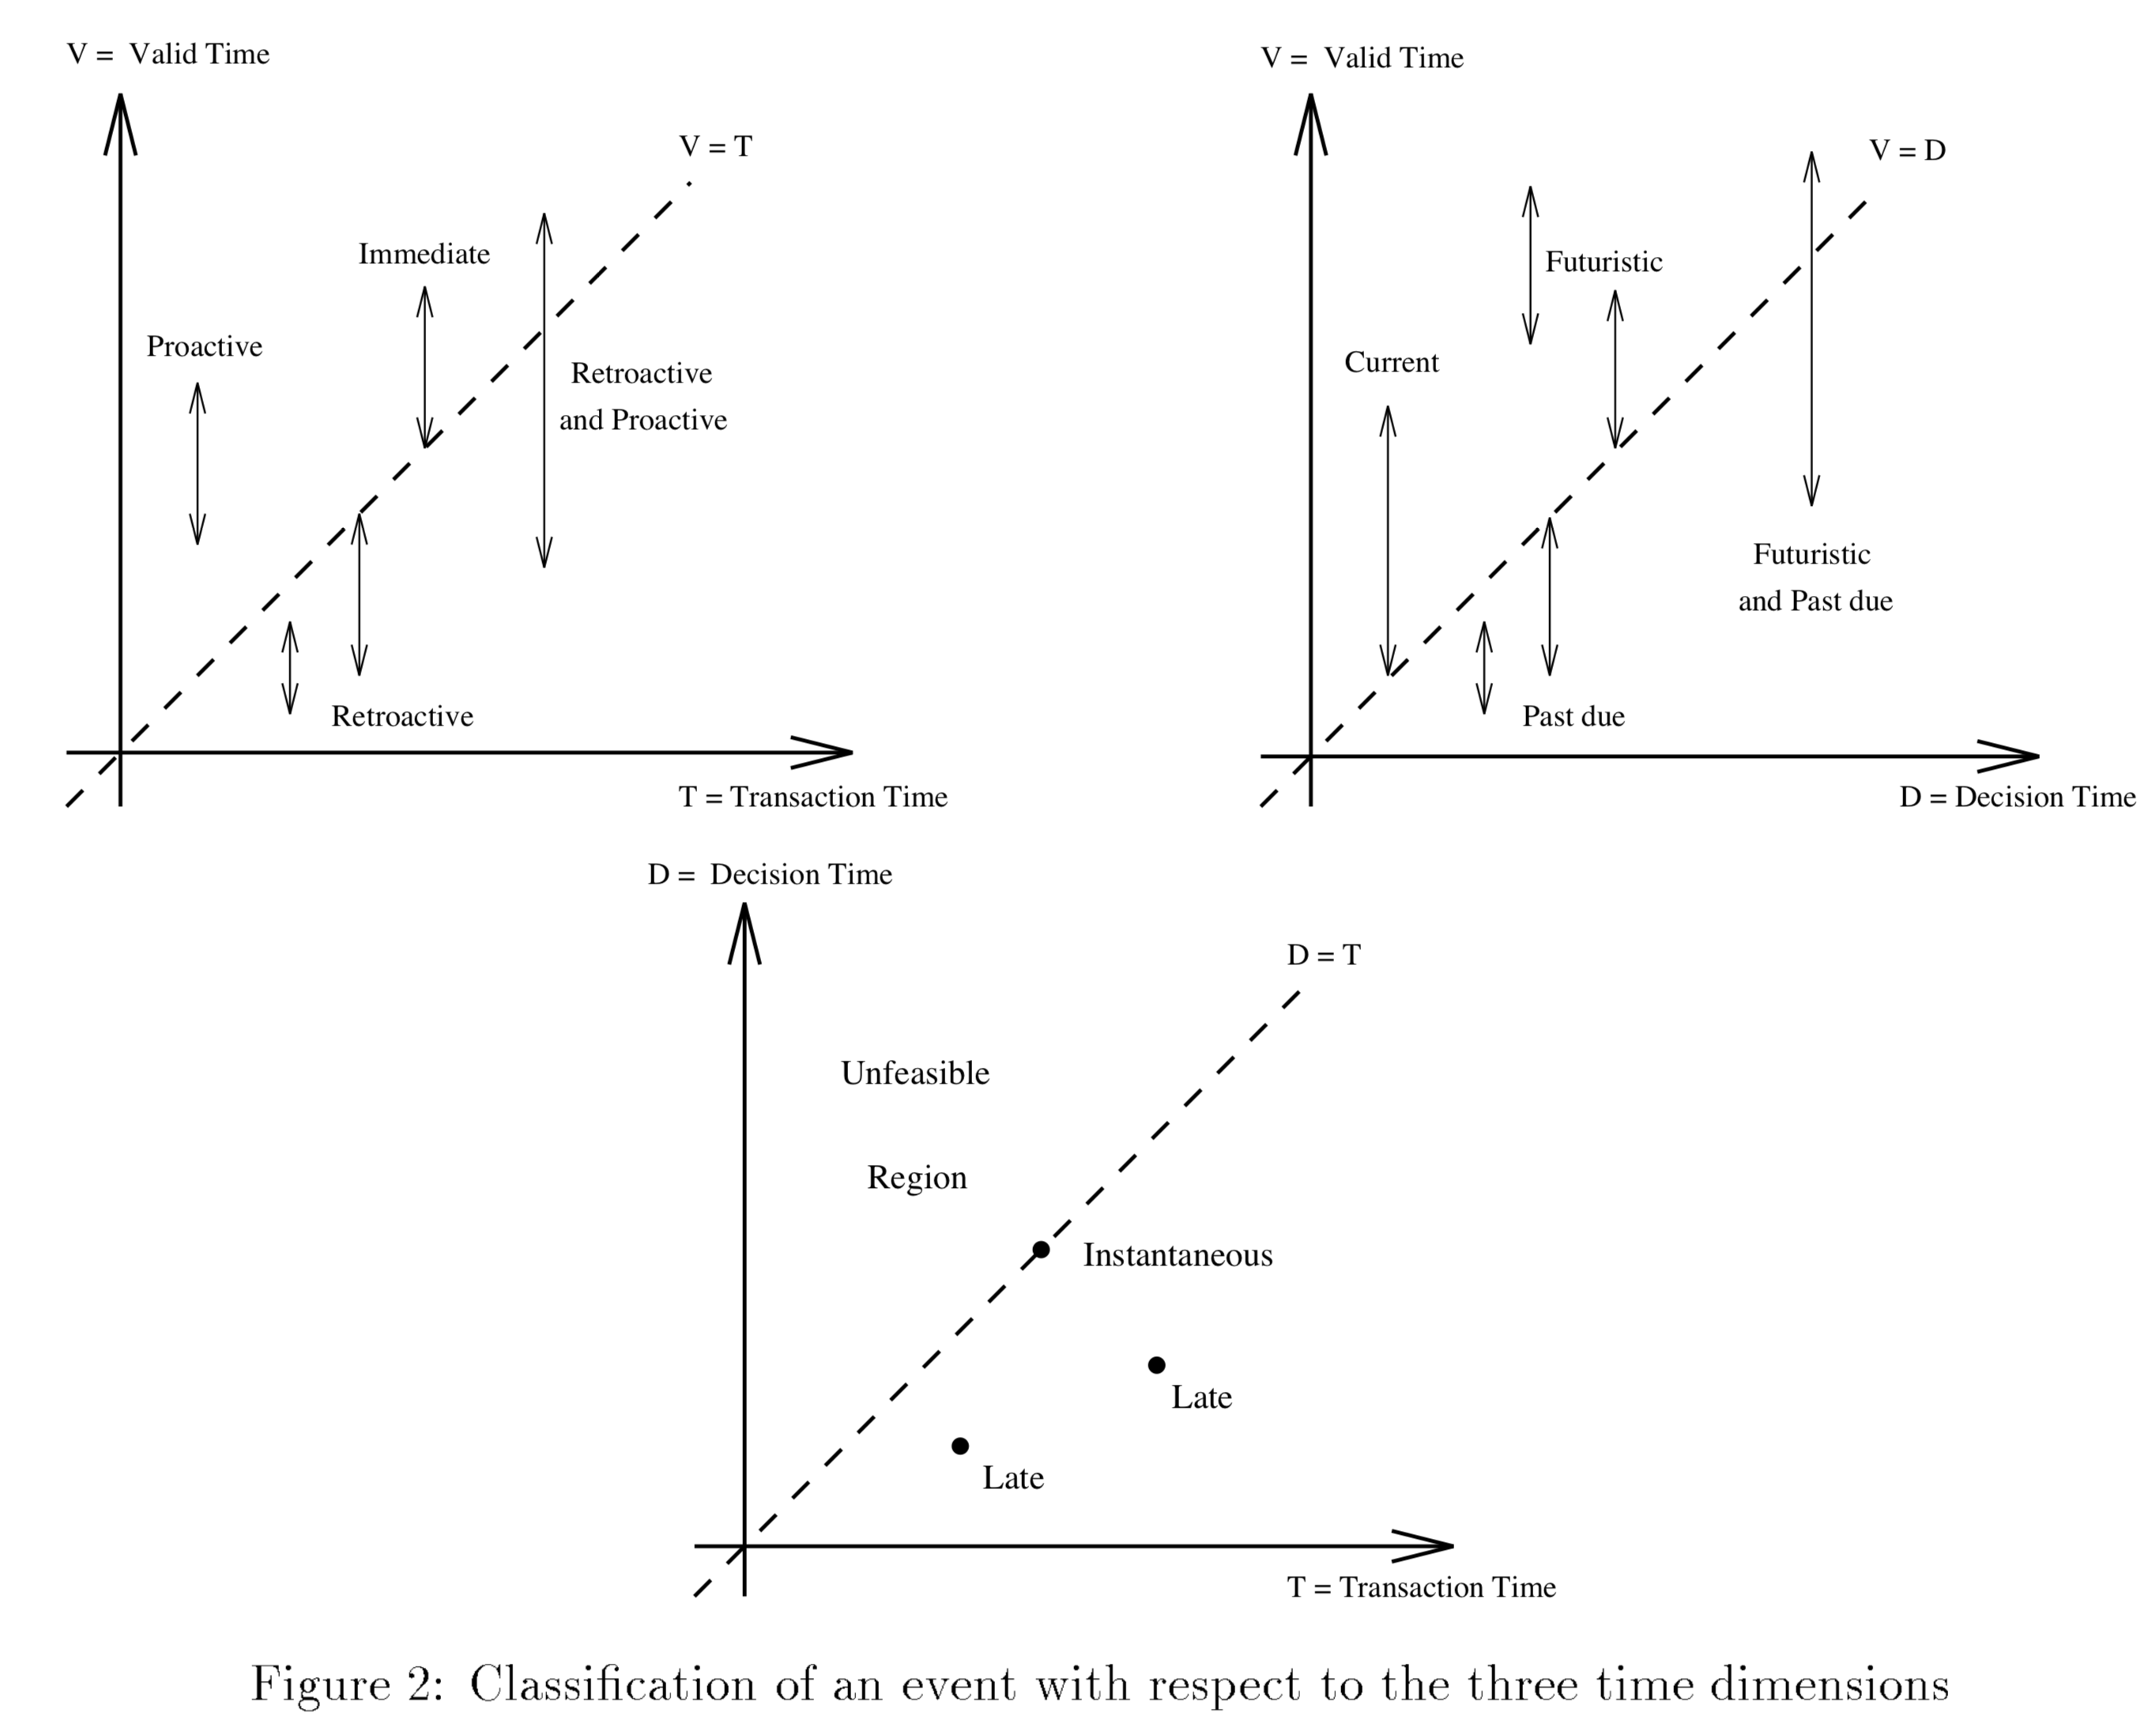 Classification of an event with respect to the three time dimensions